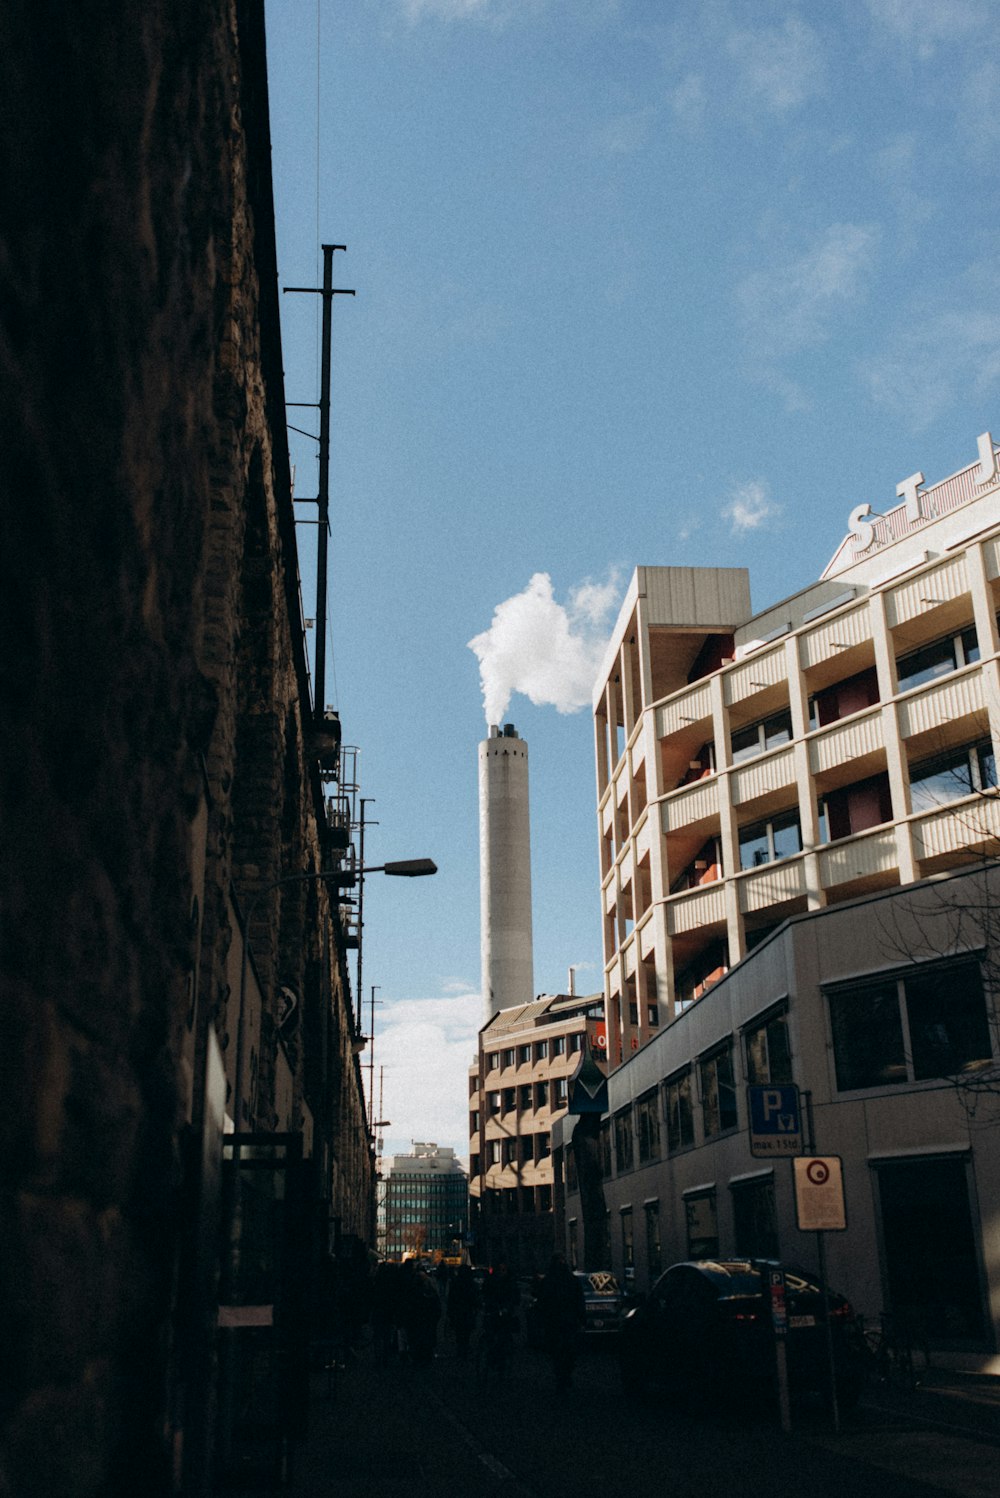 a city street with tall buildings and a smoke stack in the distance